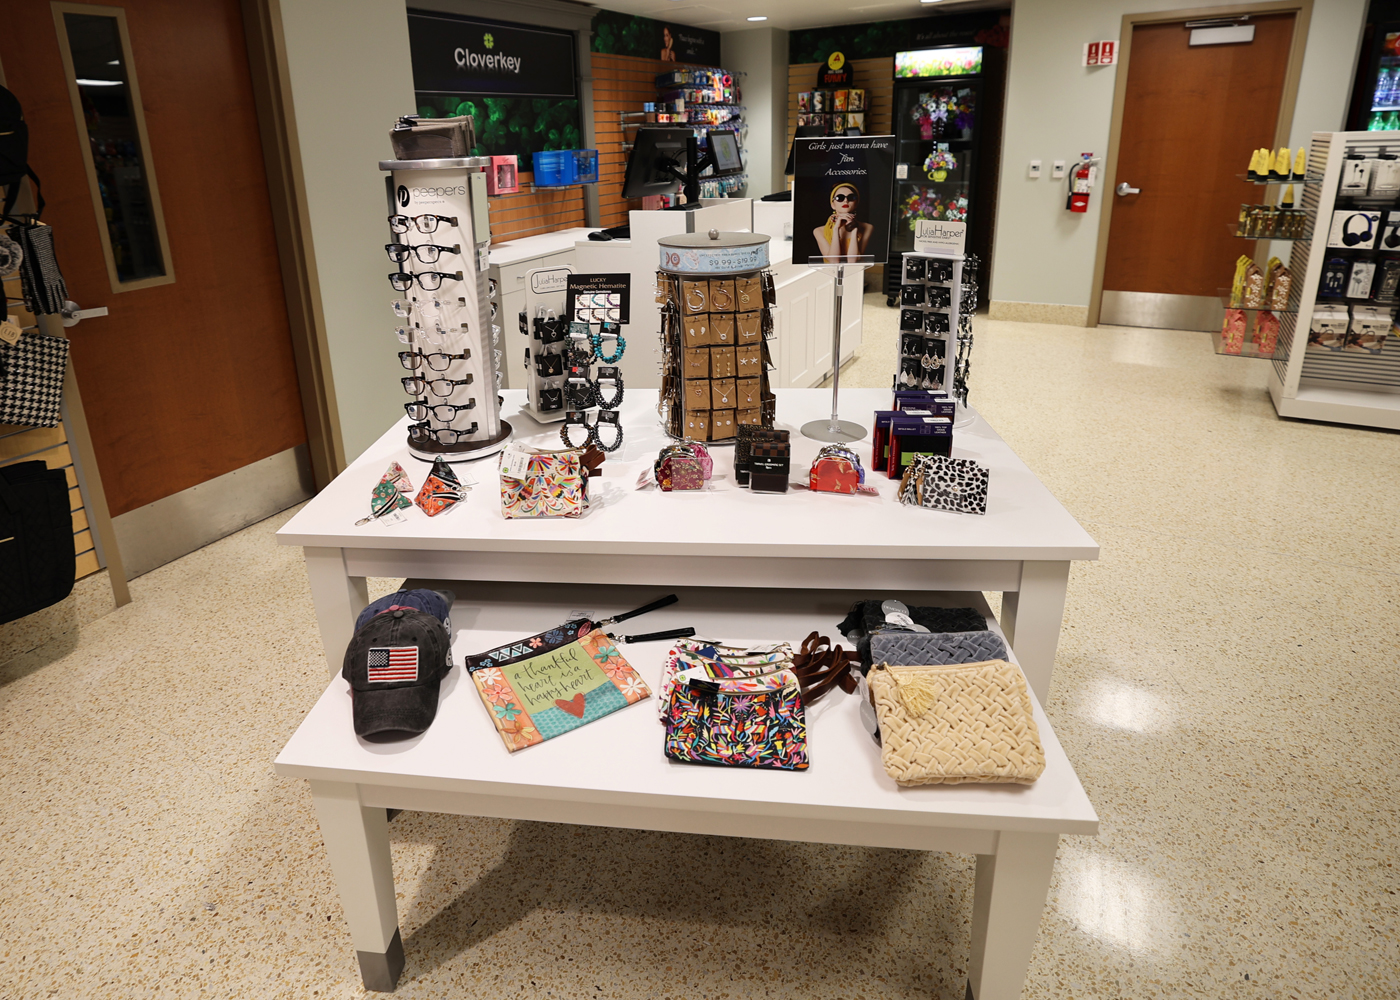 The Cloverkey gift shop at The Hospitals of Providence, Memorial Campus